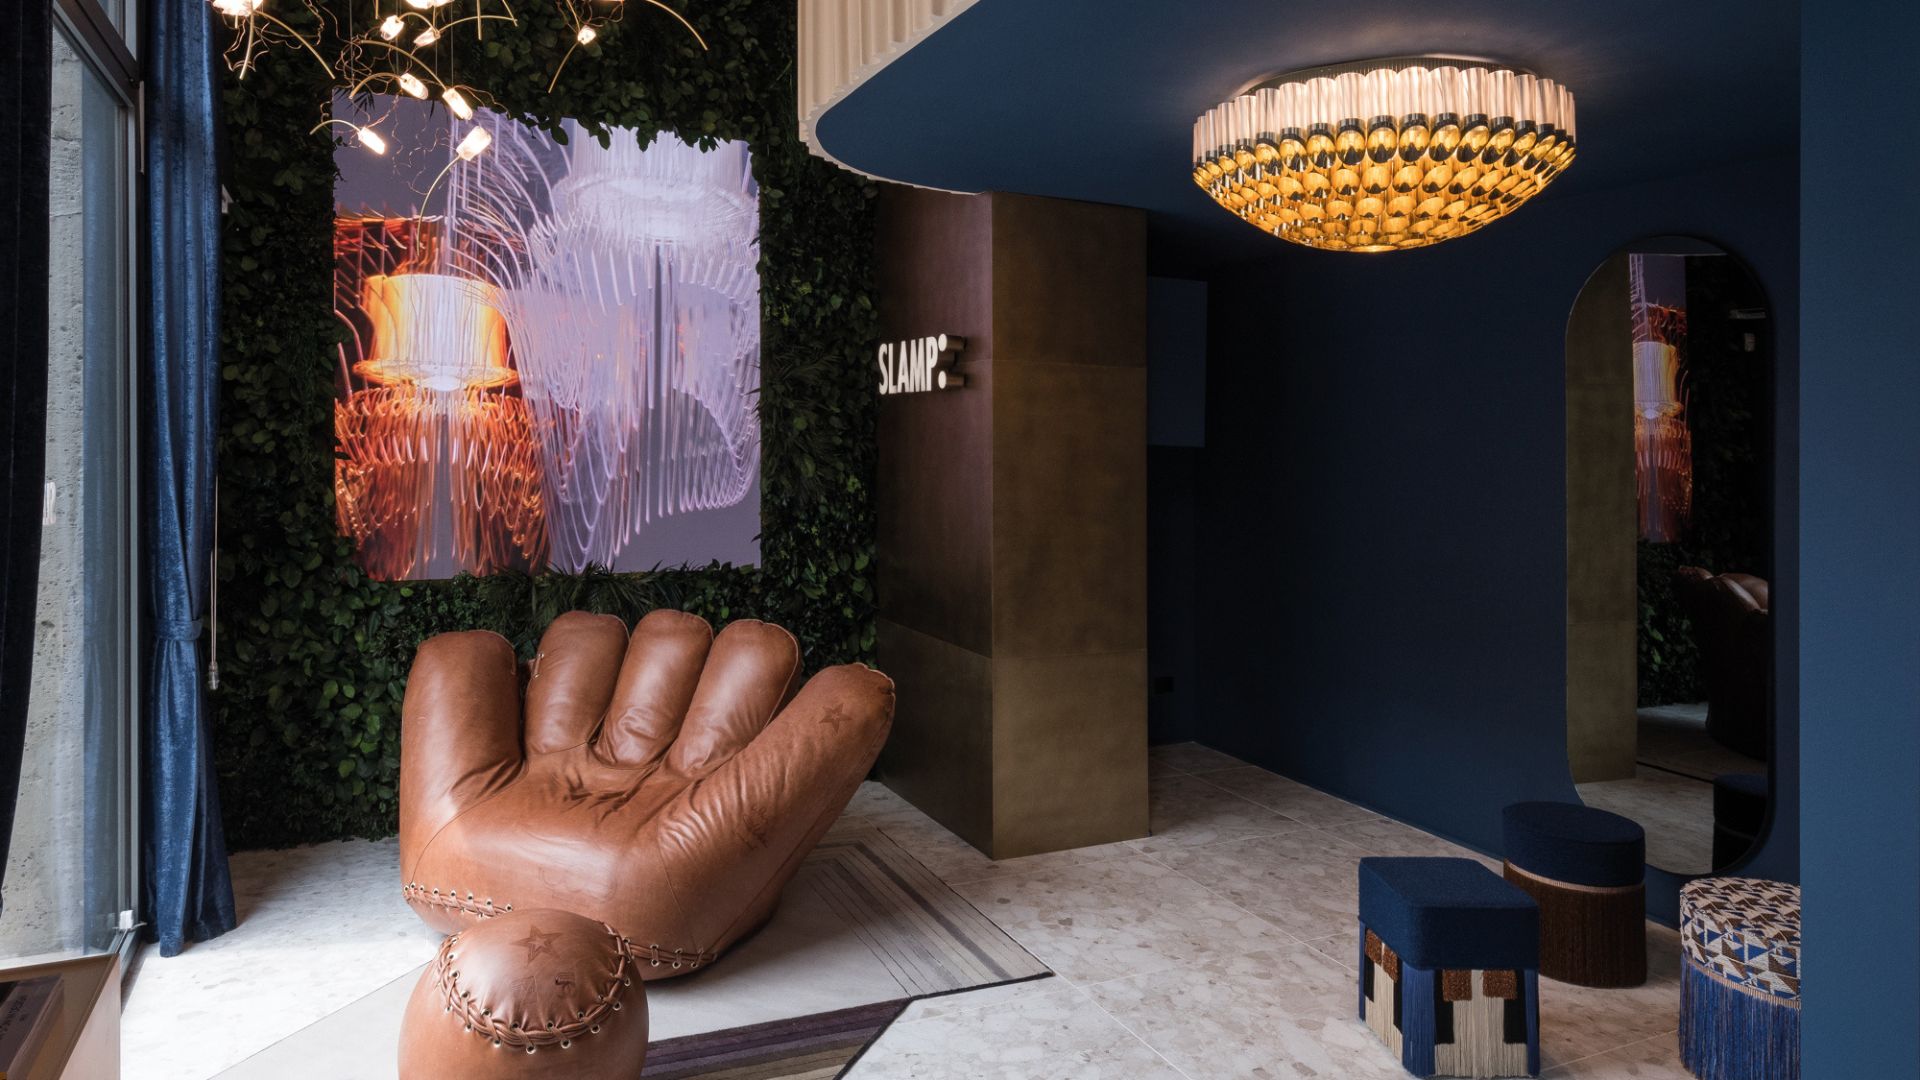 Meting whisky Tektonisch Slamp: the first flagship store opened in Milan - DesignWanted :  DesignWanted